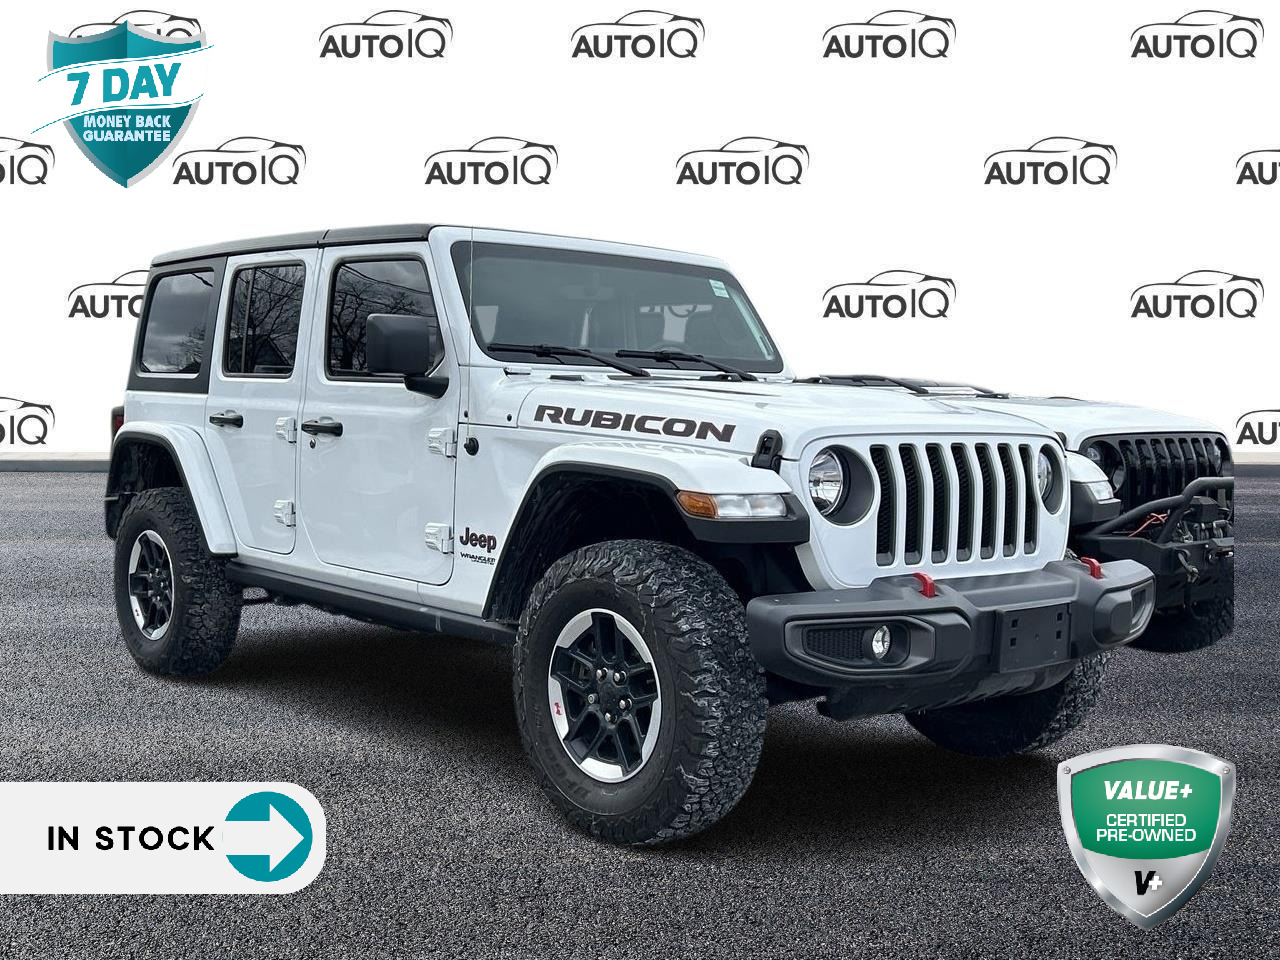 2022 Jeep WRANGLER UNLIMITED Rubicon $249 BI-WEEKLY + HST*